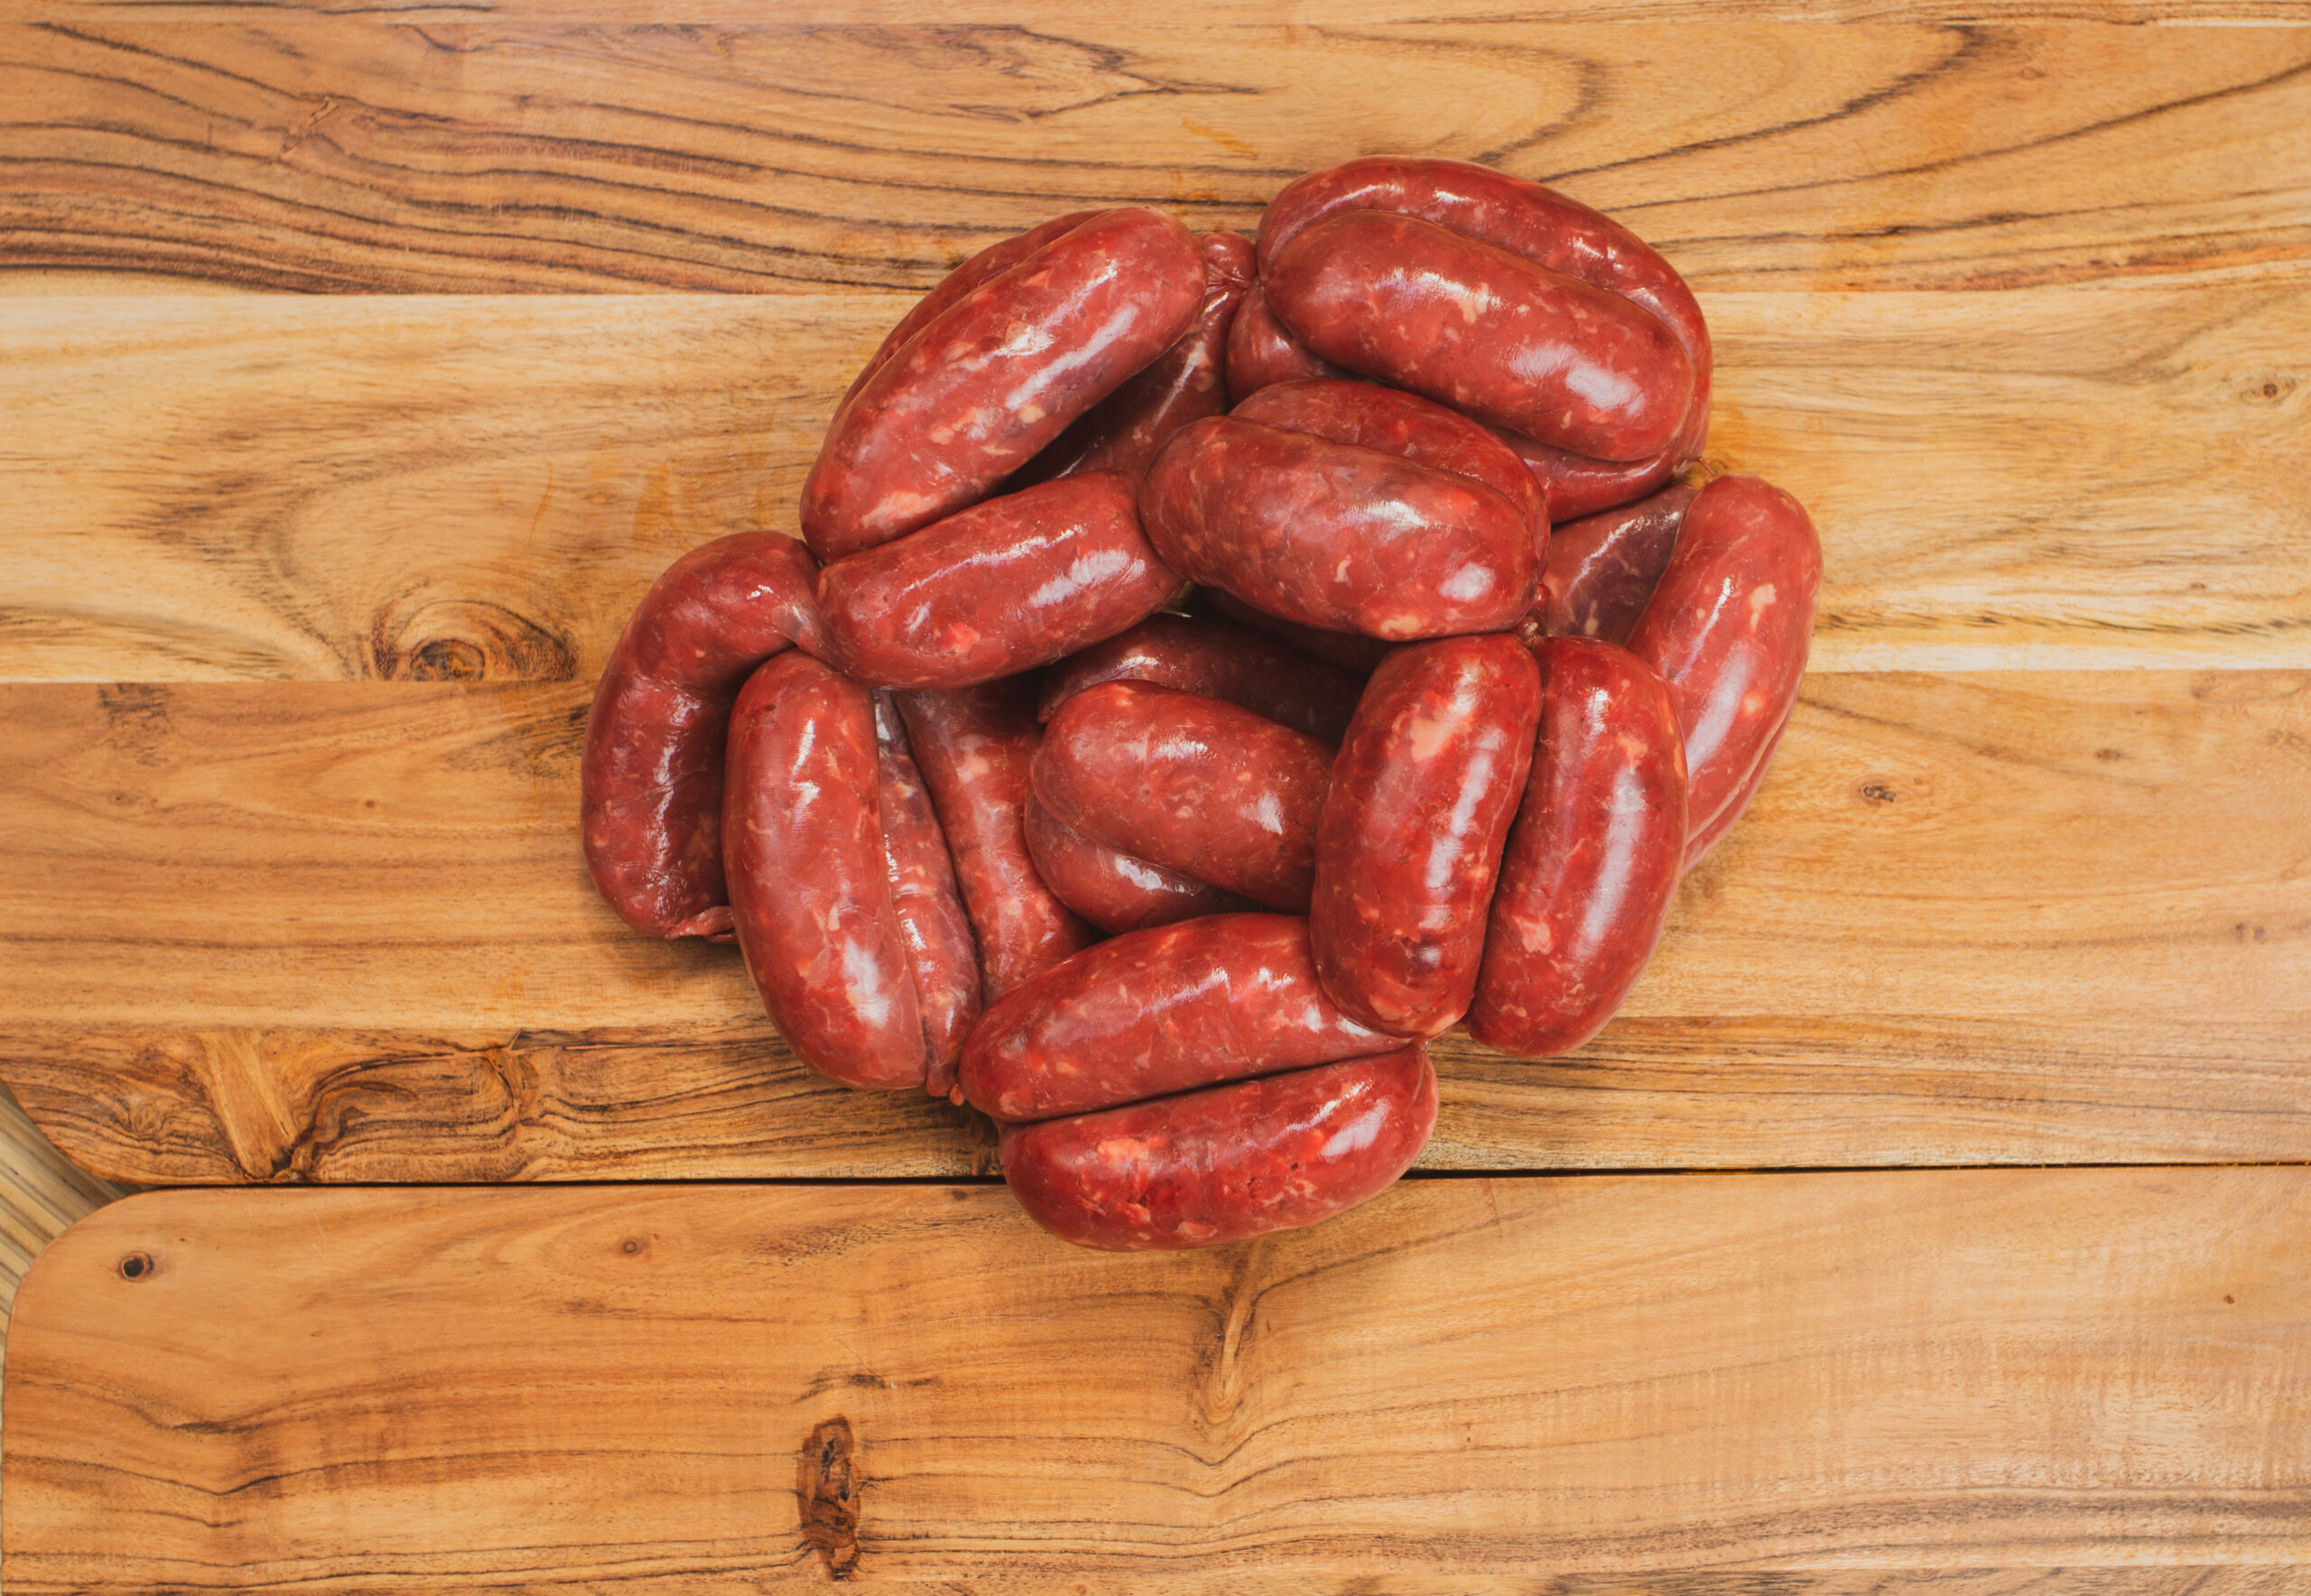 Gourmet dog food: Juicy beef sausages for dogs, a mouthwatering and high-quality protein source